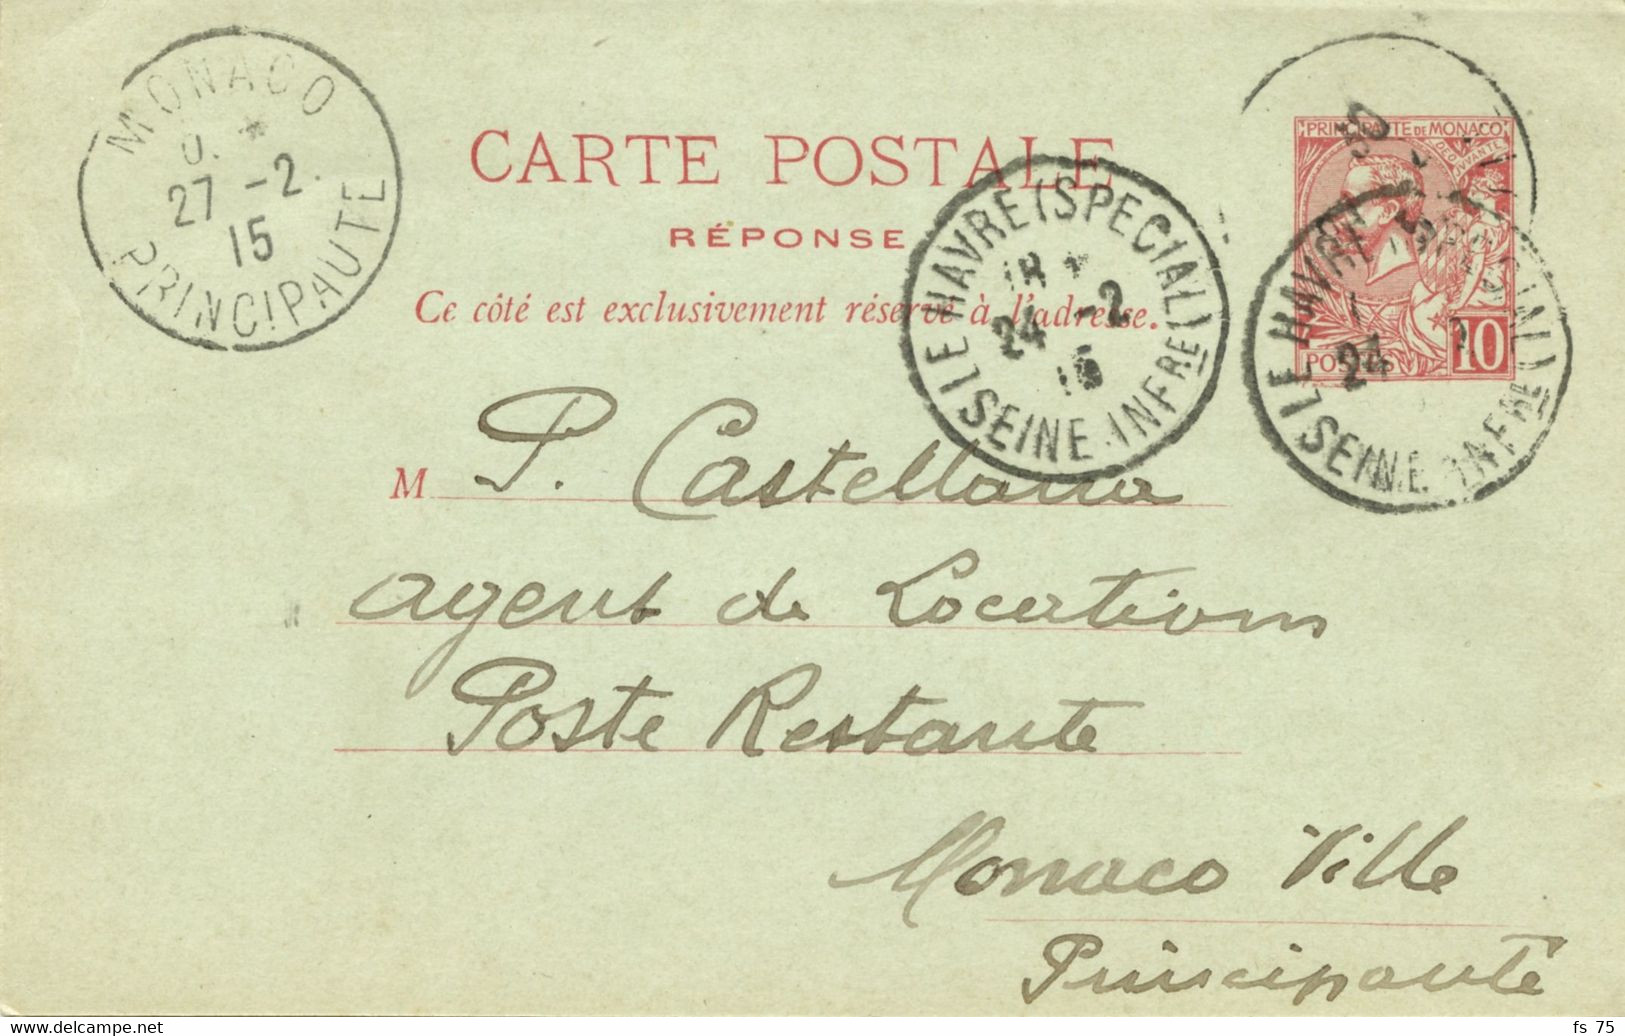 ENTIER CARTE POSTALE REPONSE PAYEE 10C ALBERT 1ER VOLET REPONSE OBLITERE LE HAVRE (SPECIAL), 1915 - Postal Stationery